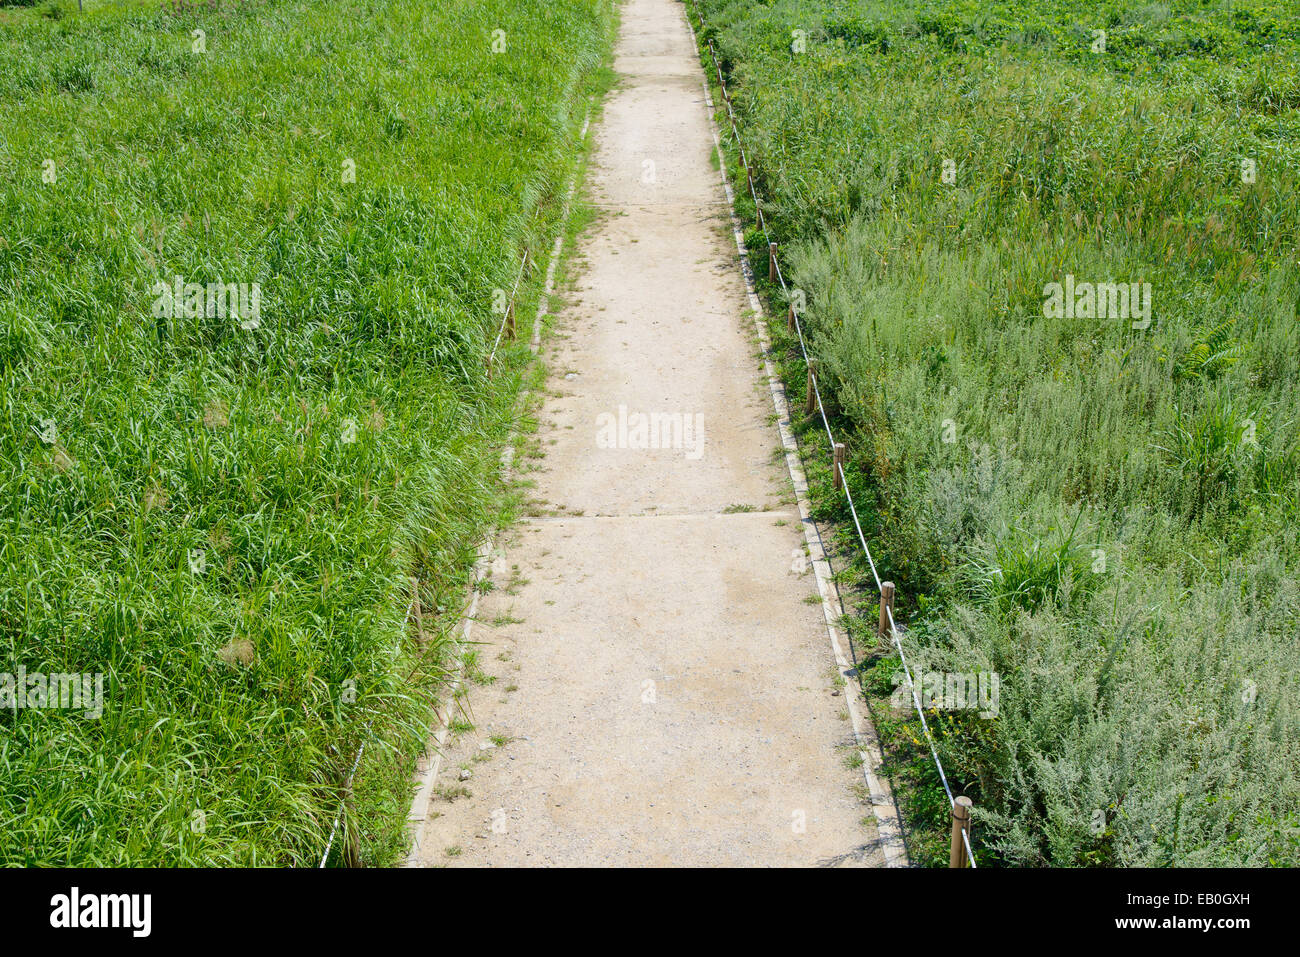 straight path in a silver grass field Stock Photo